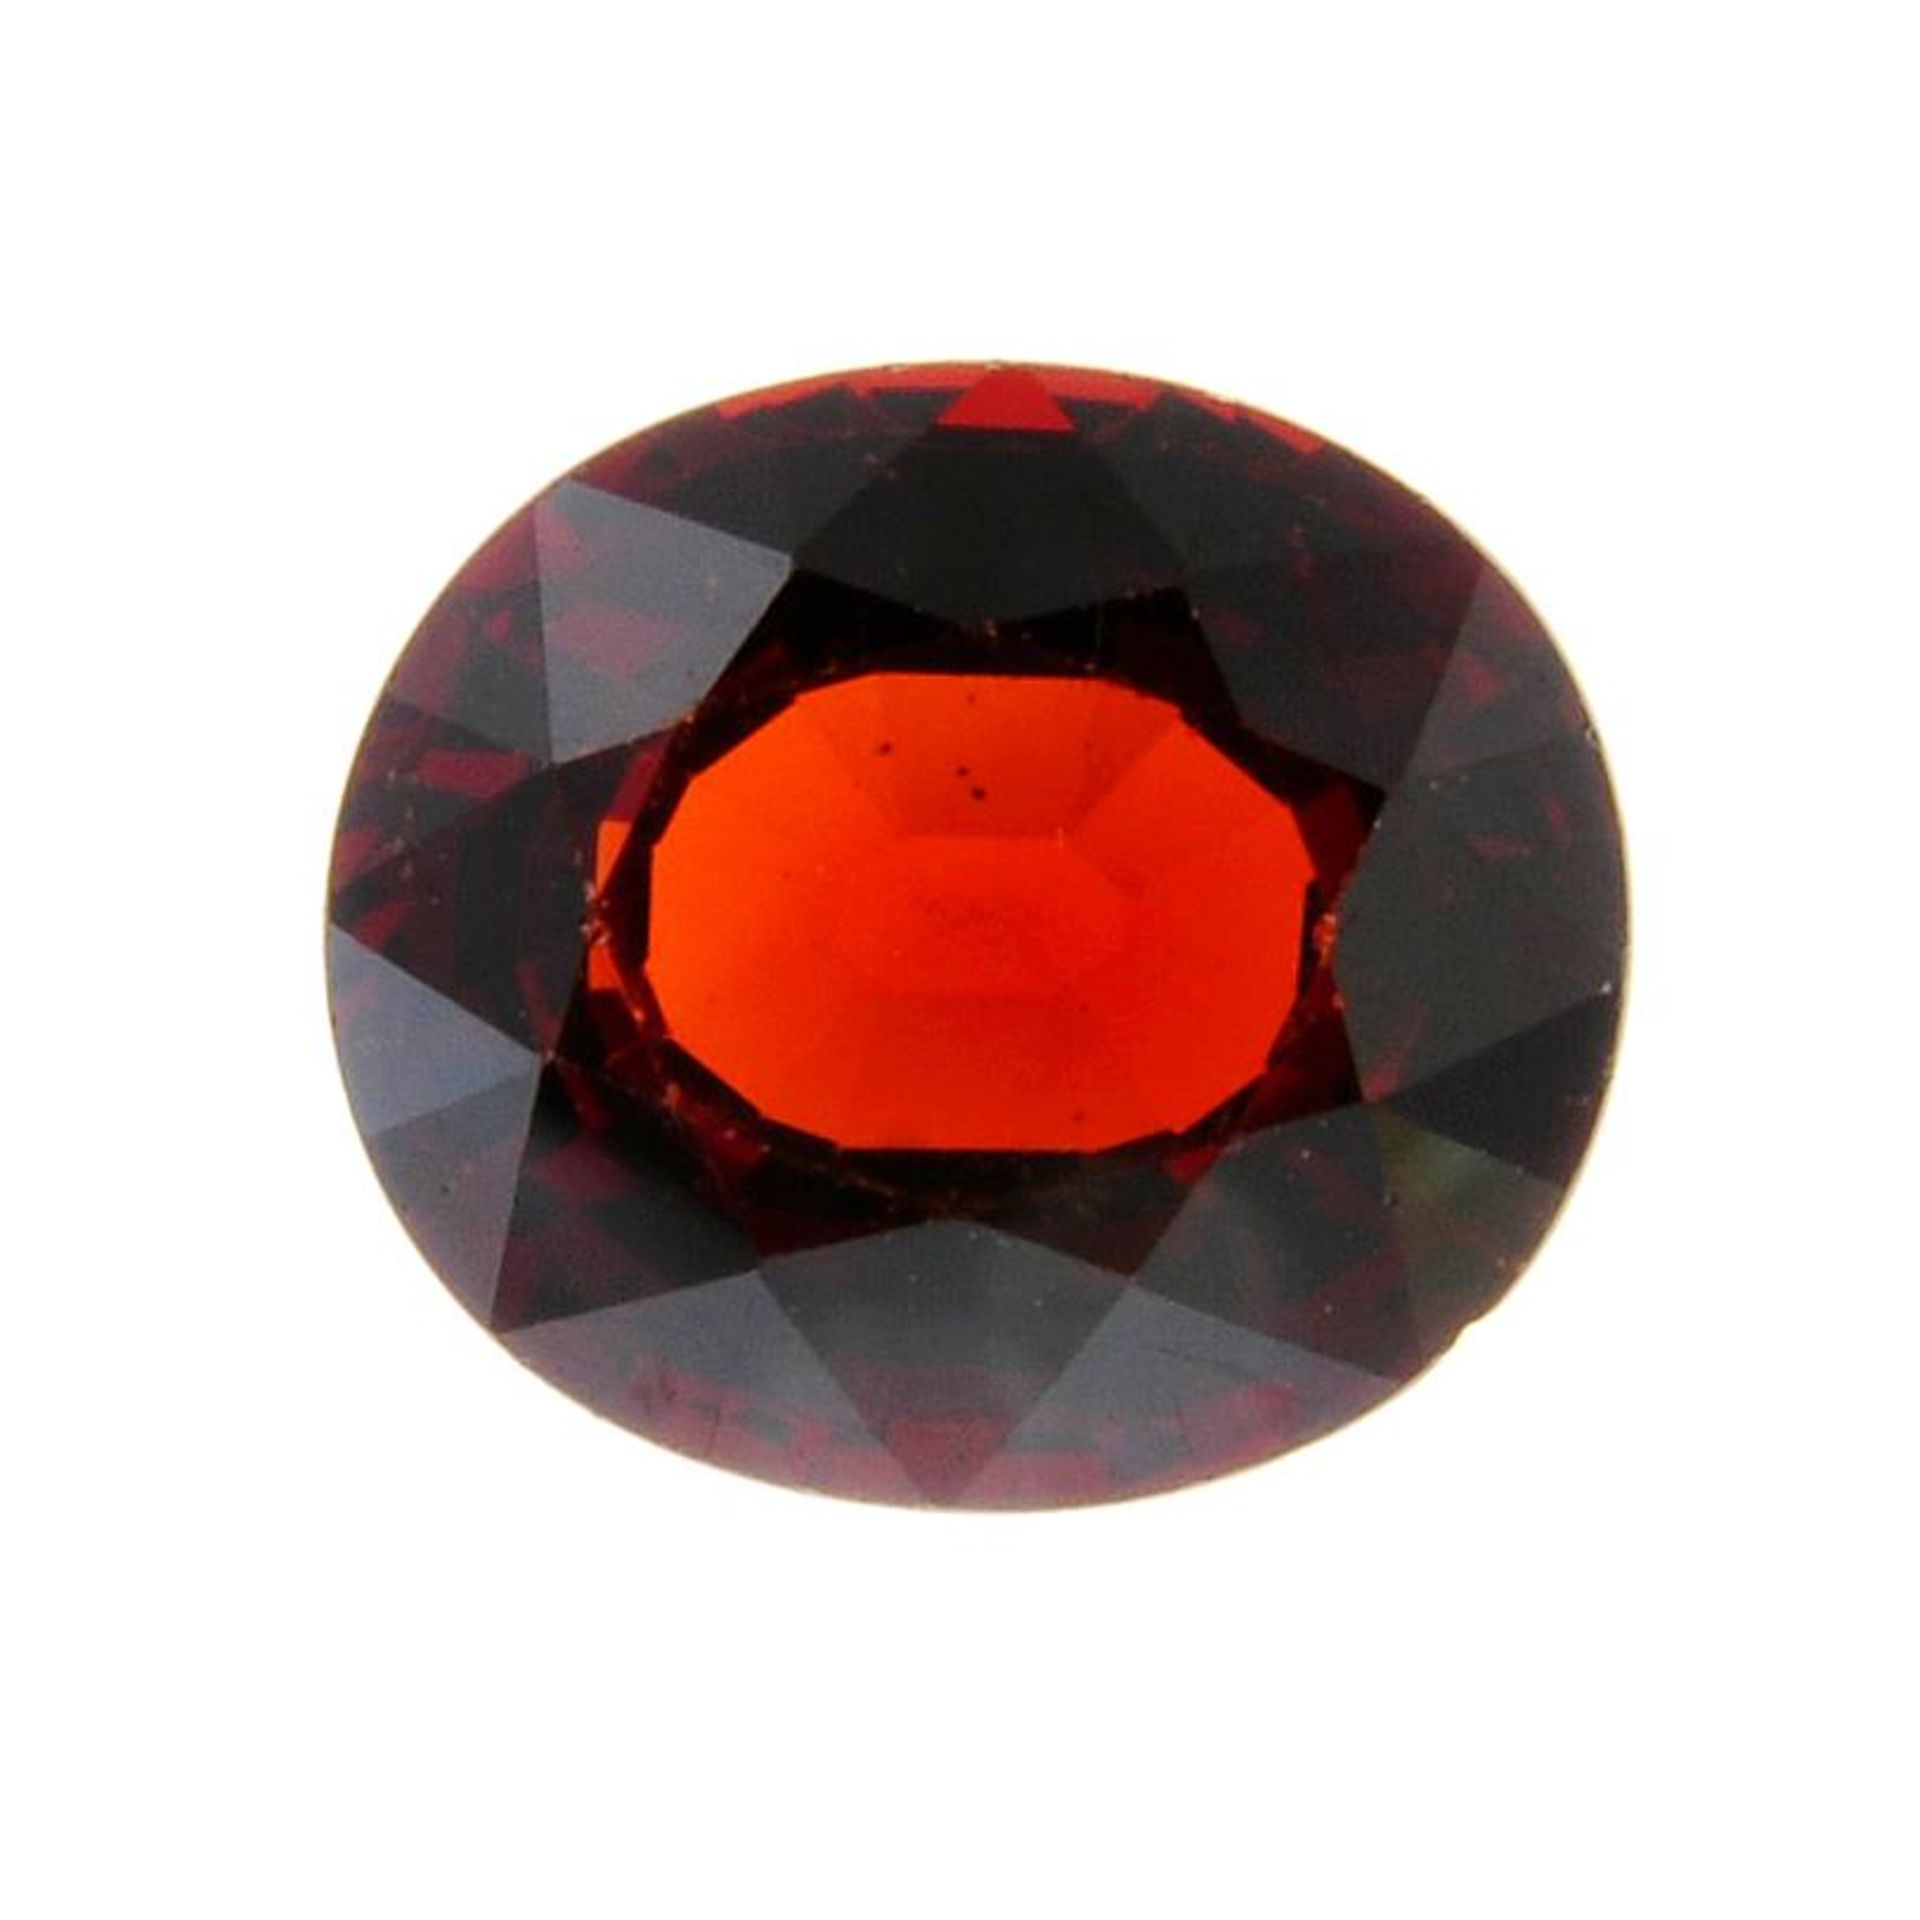 A oval shape garnet weighing 5.99ct measuring 11.25 by 9.95 by 5.9mm.